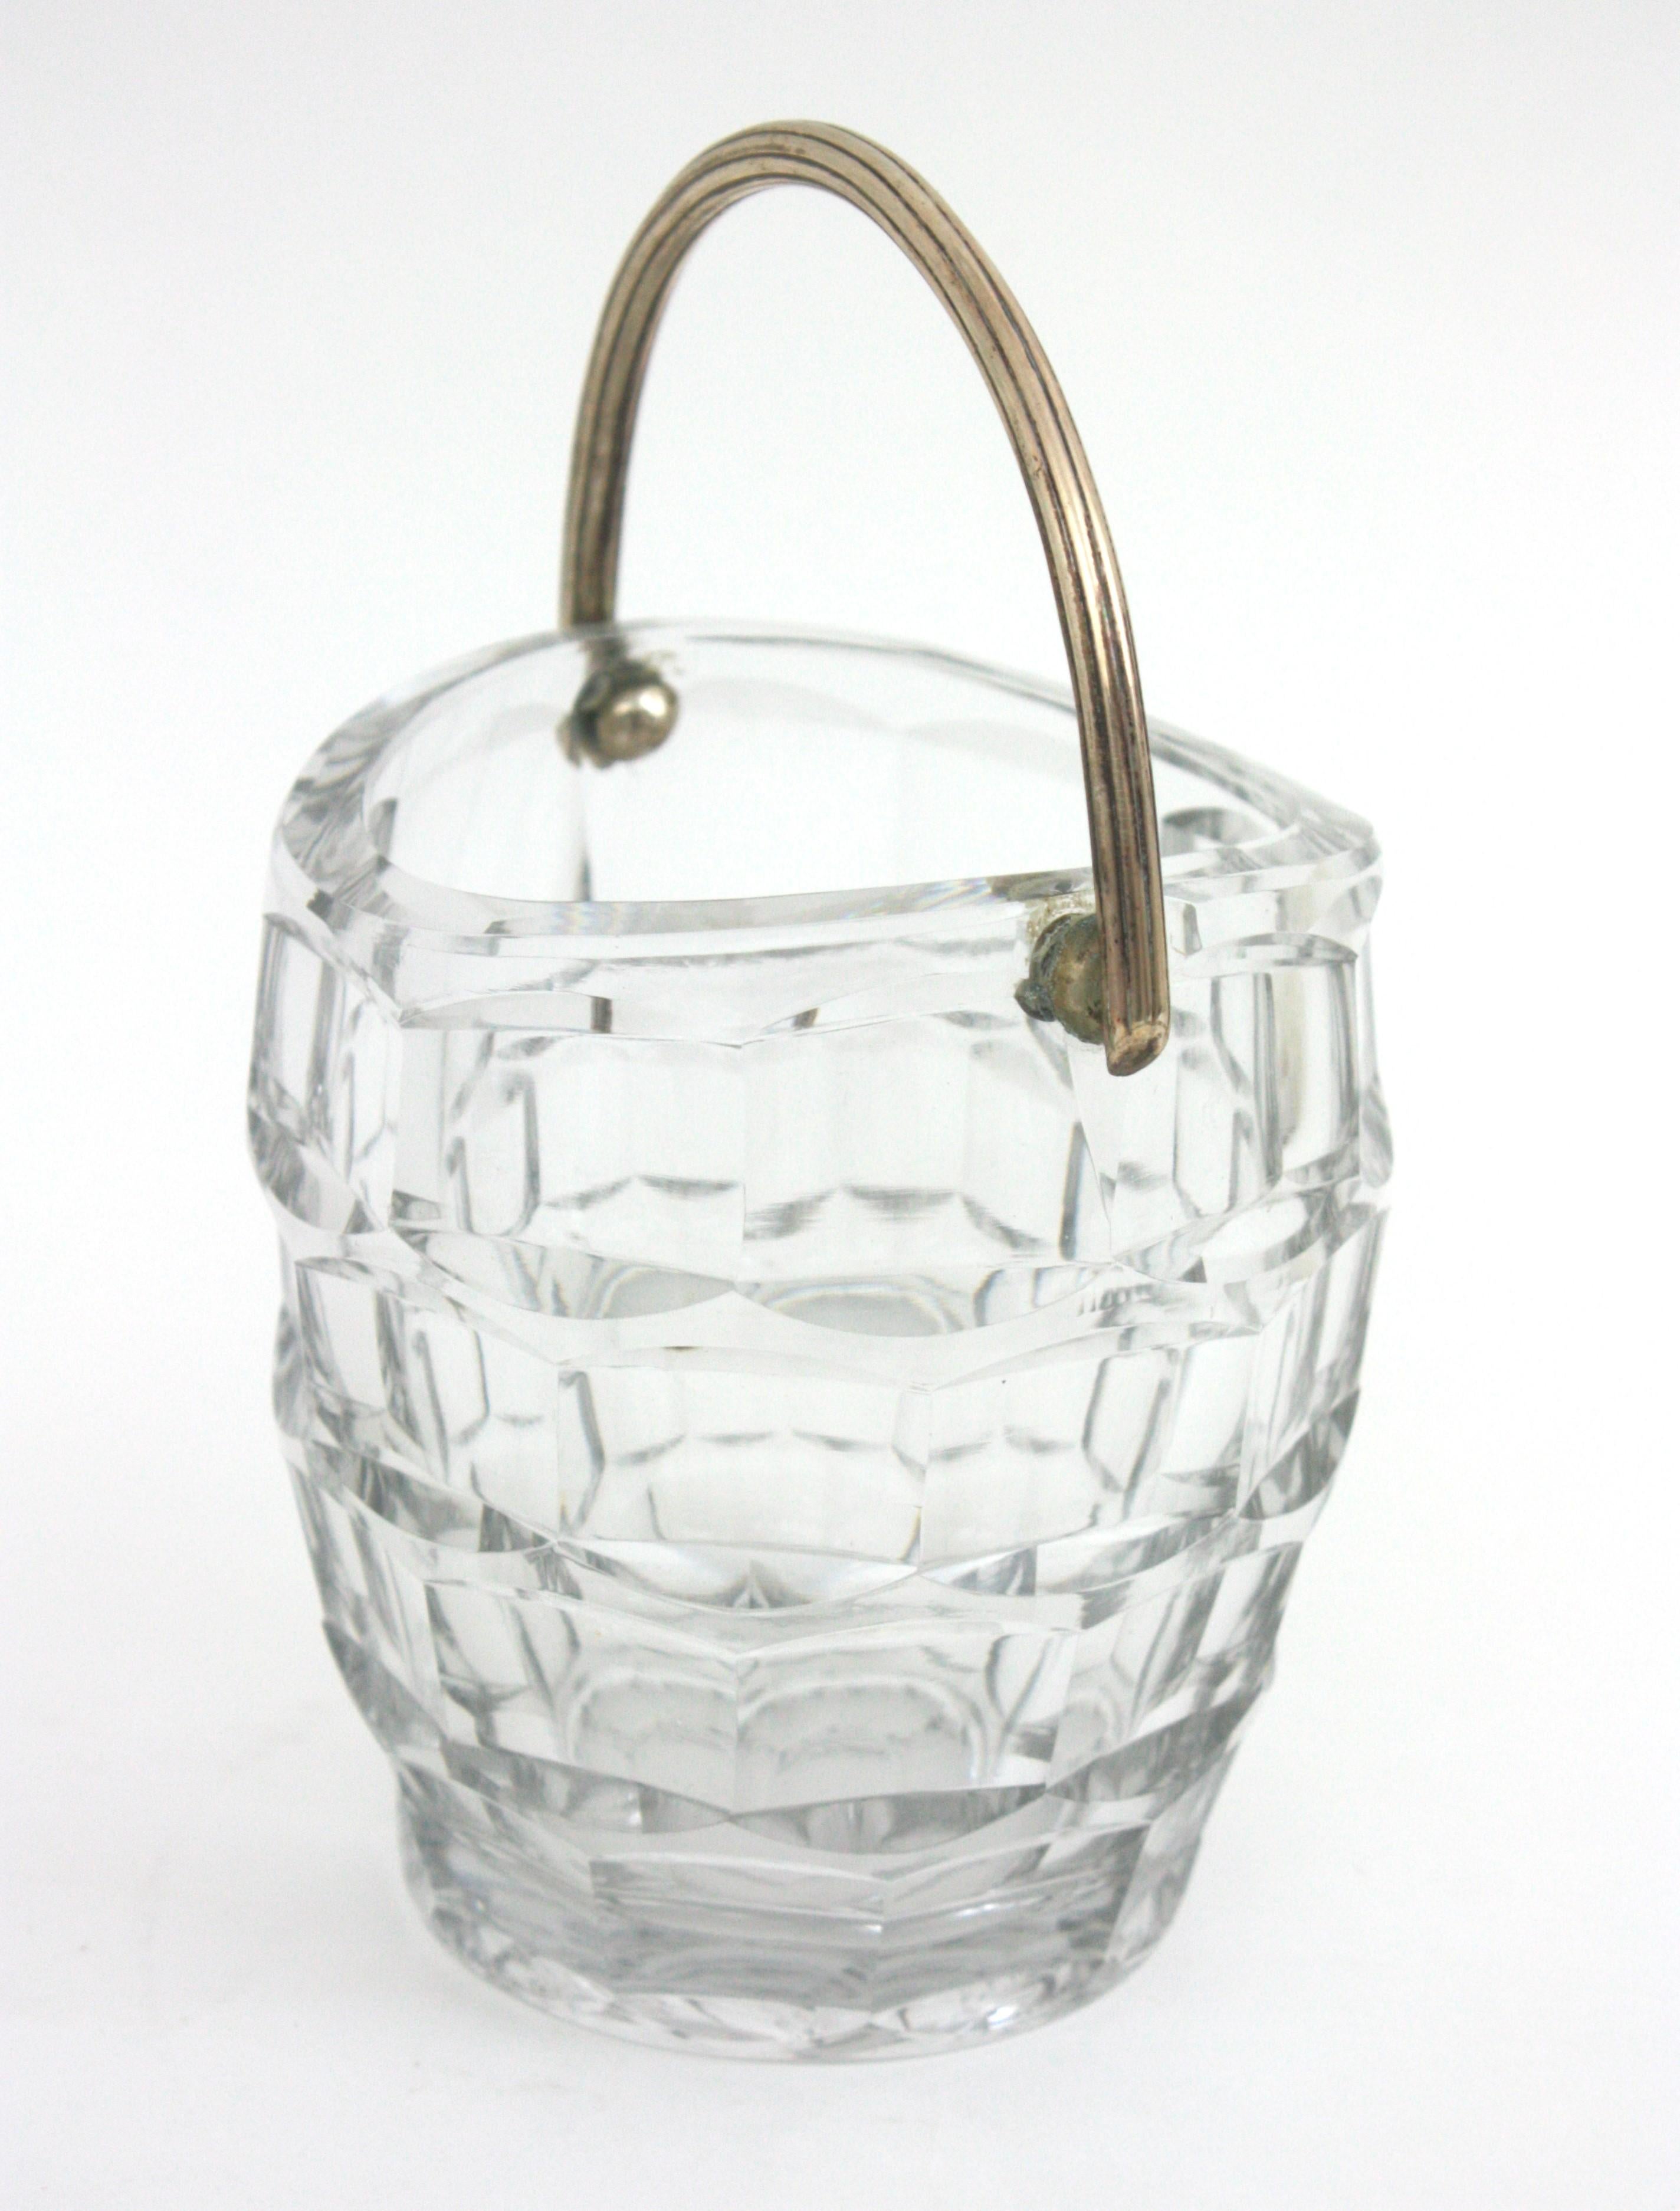 Midcentury Baccarat Cut Crystal and Silver Ice Bucket, 1950s For Sale 2